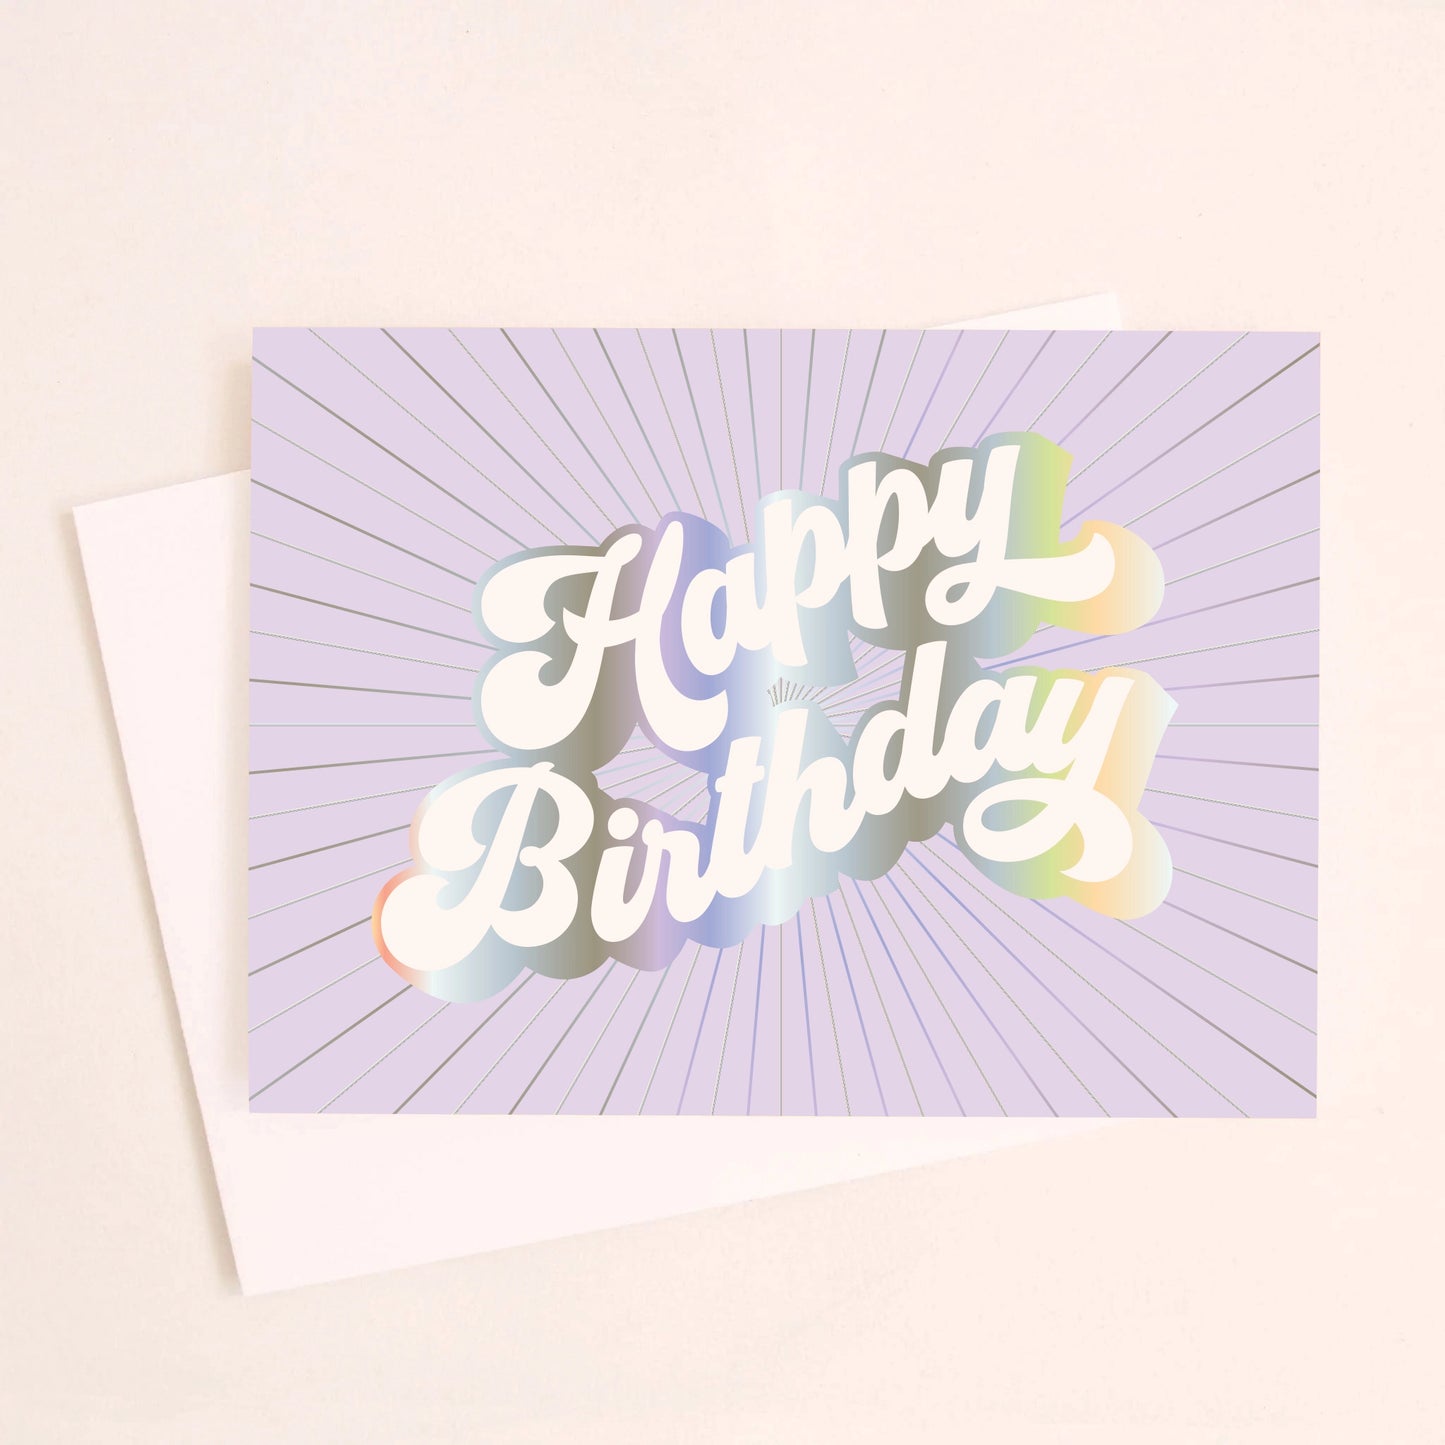 On an ivory background is a purple greeting card with white, holographic outlined text that reads, "Happy Birthday". 